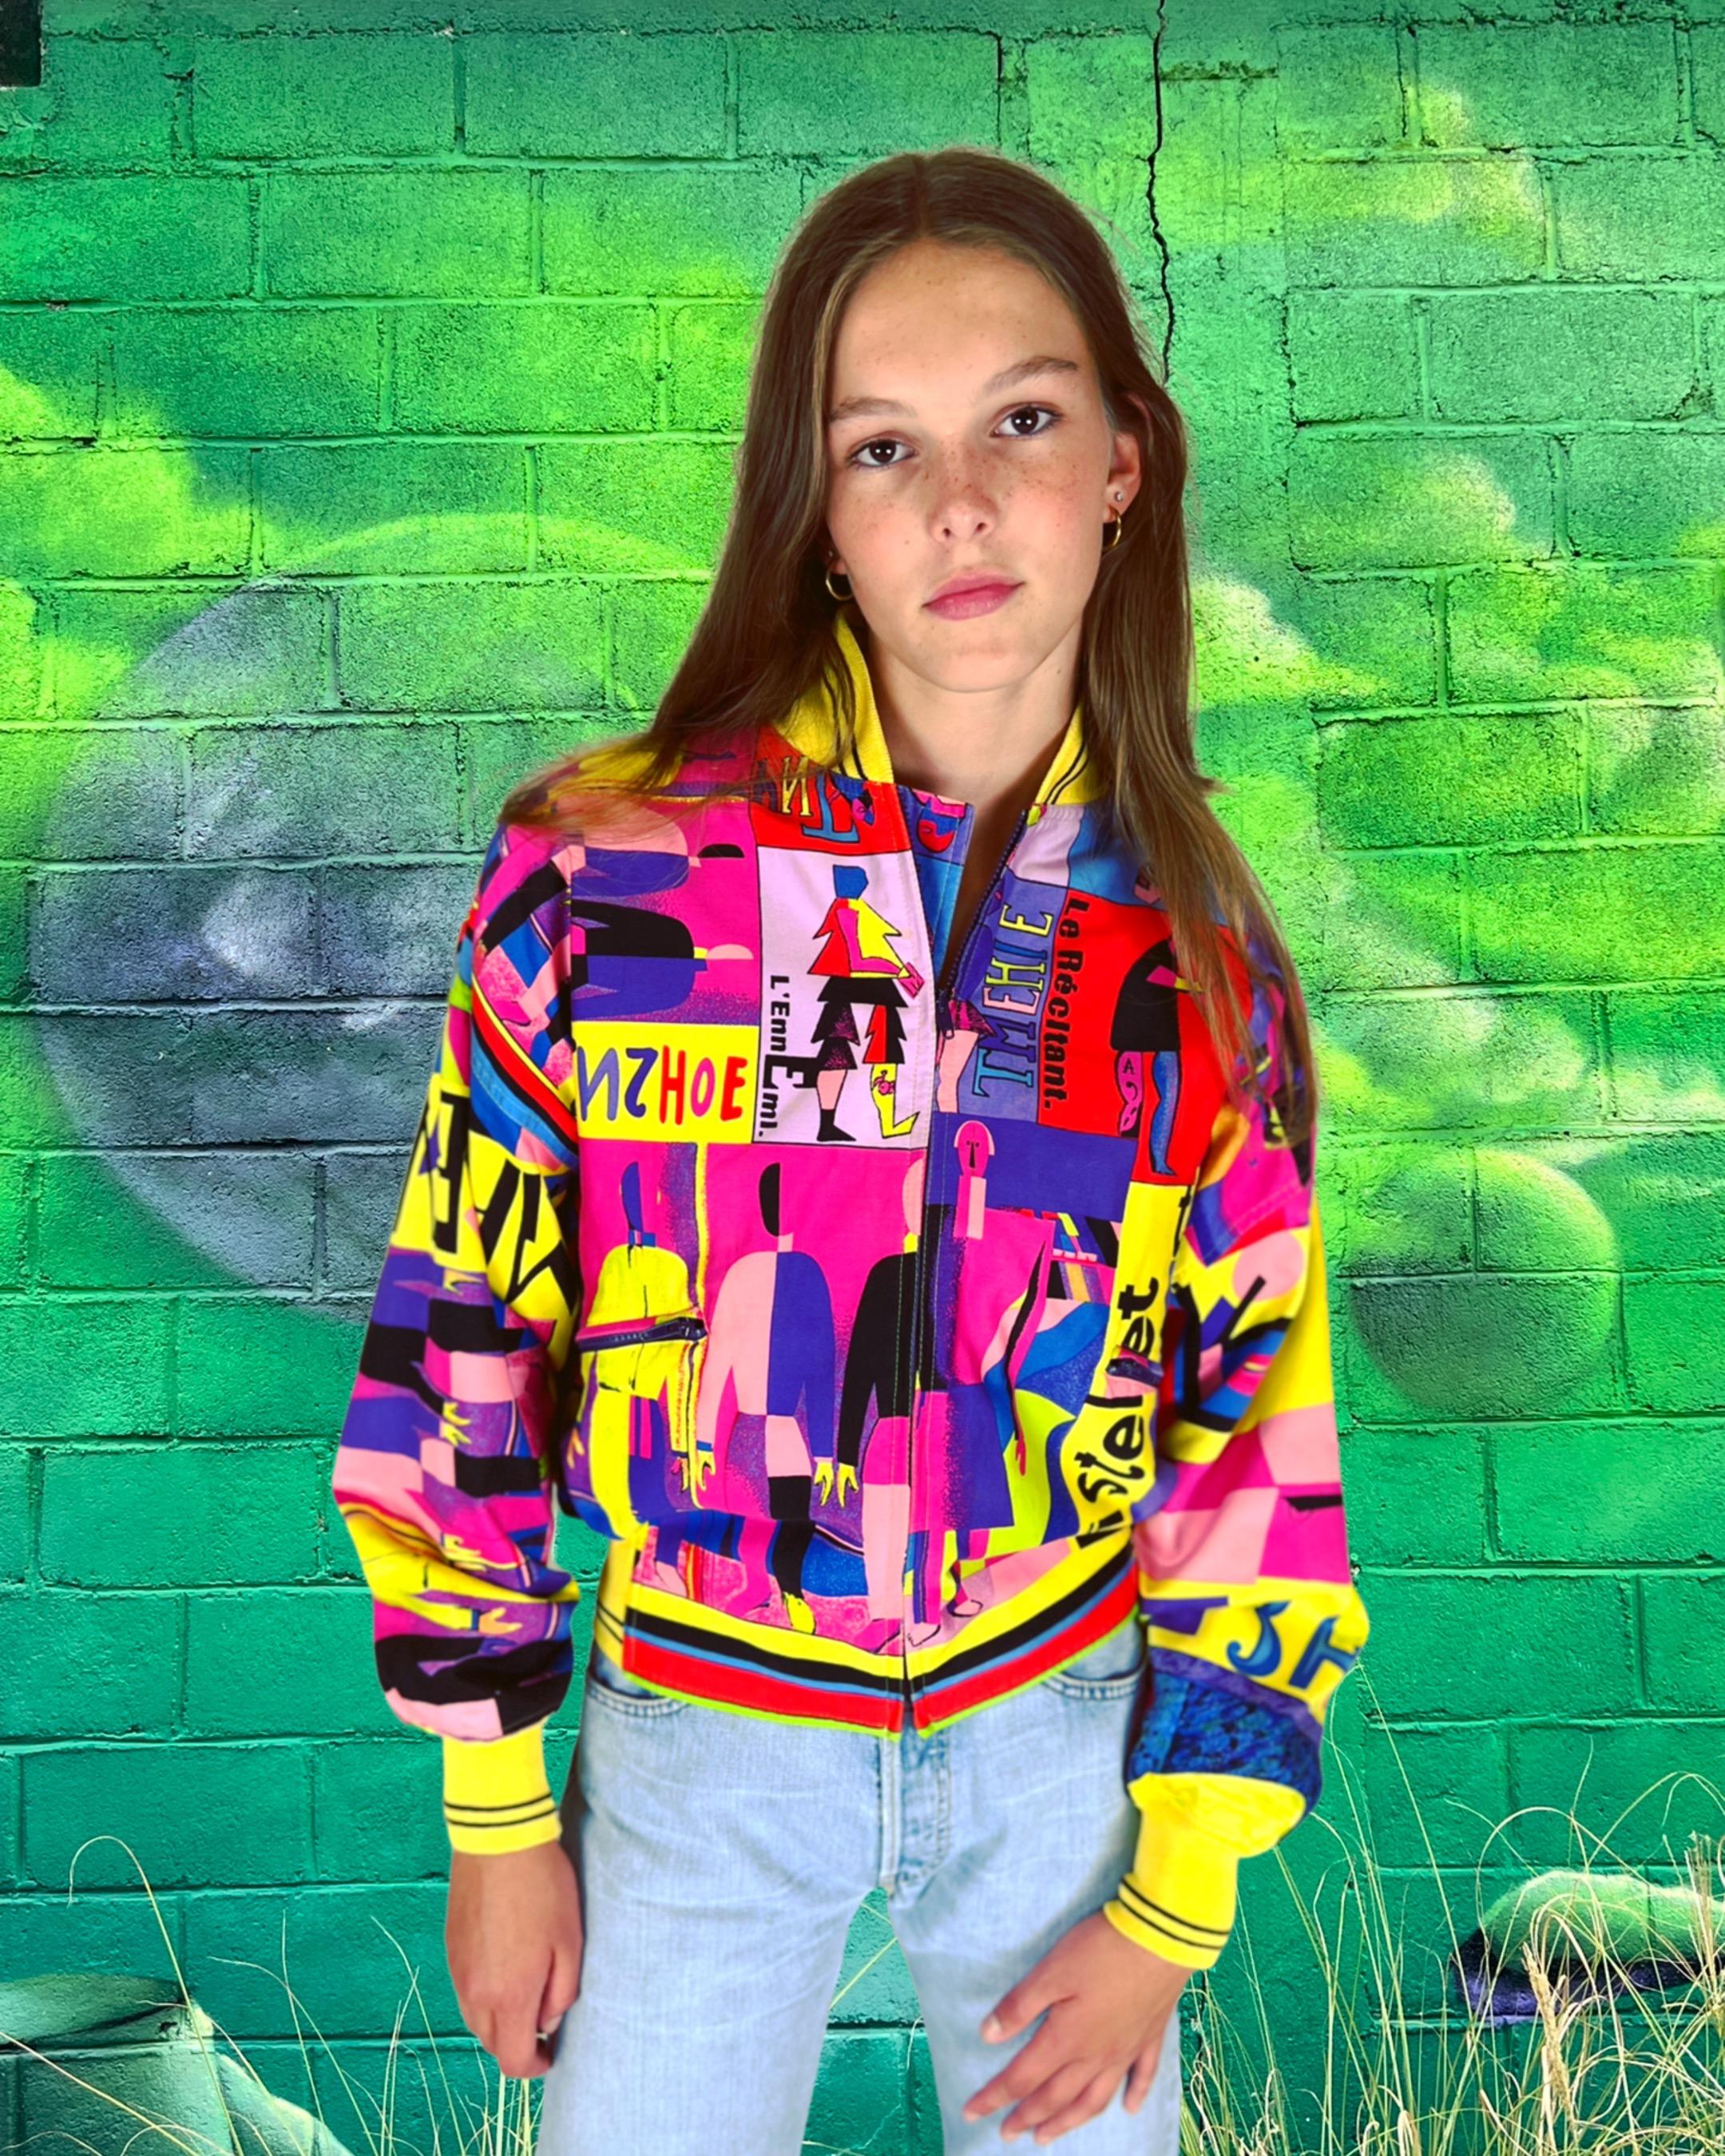 1992 Gianni Versace 'Malevich' inspired unisex bomber jacket For Sale 13